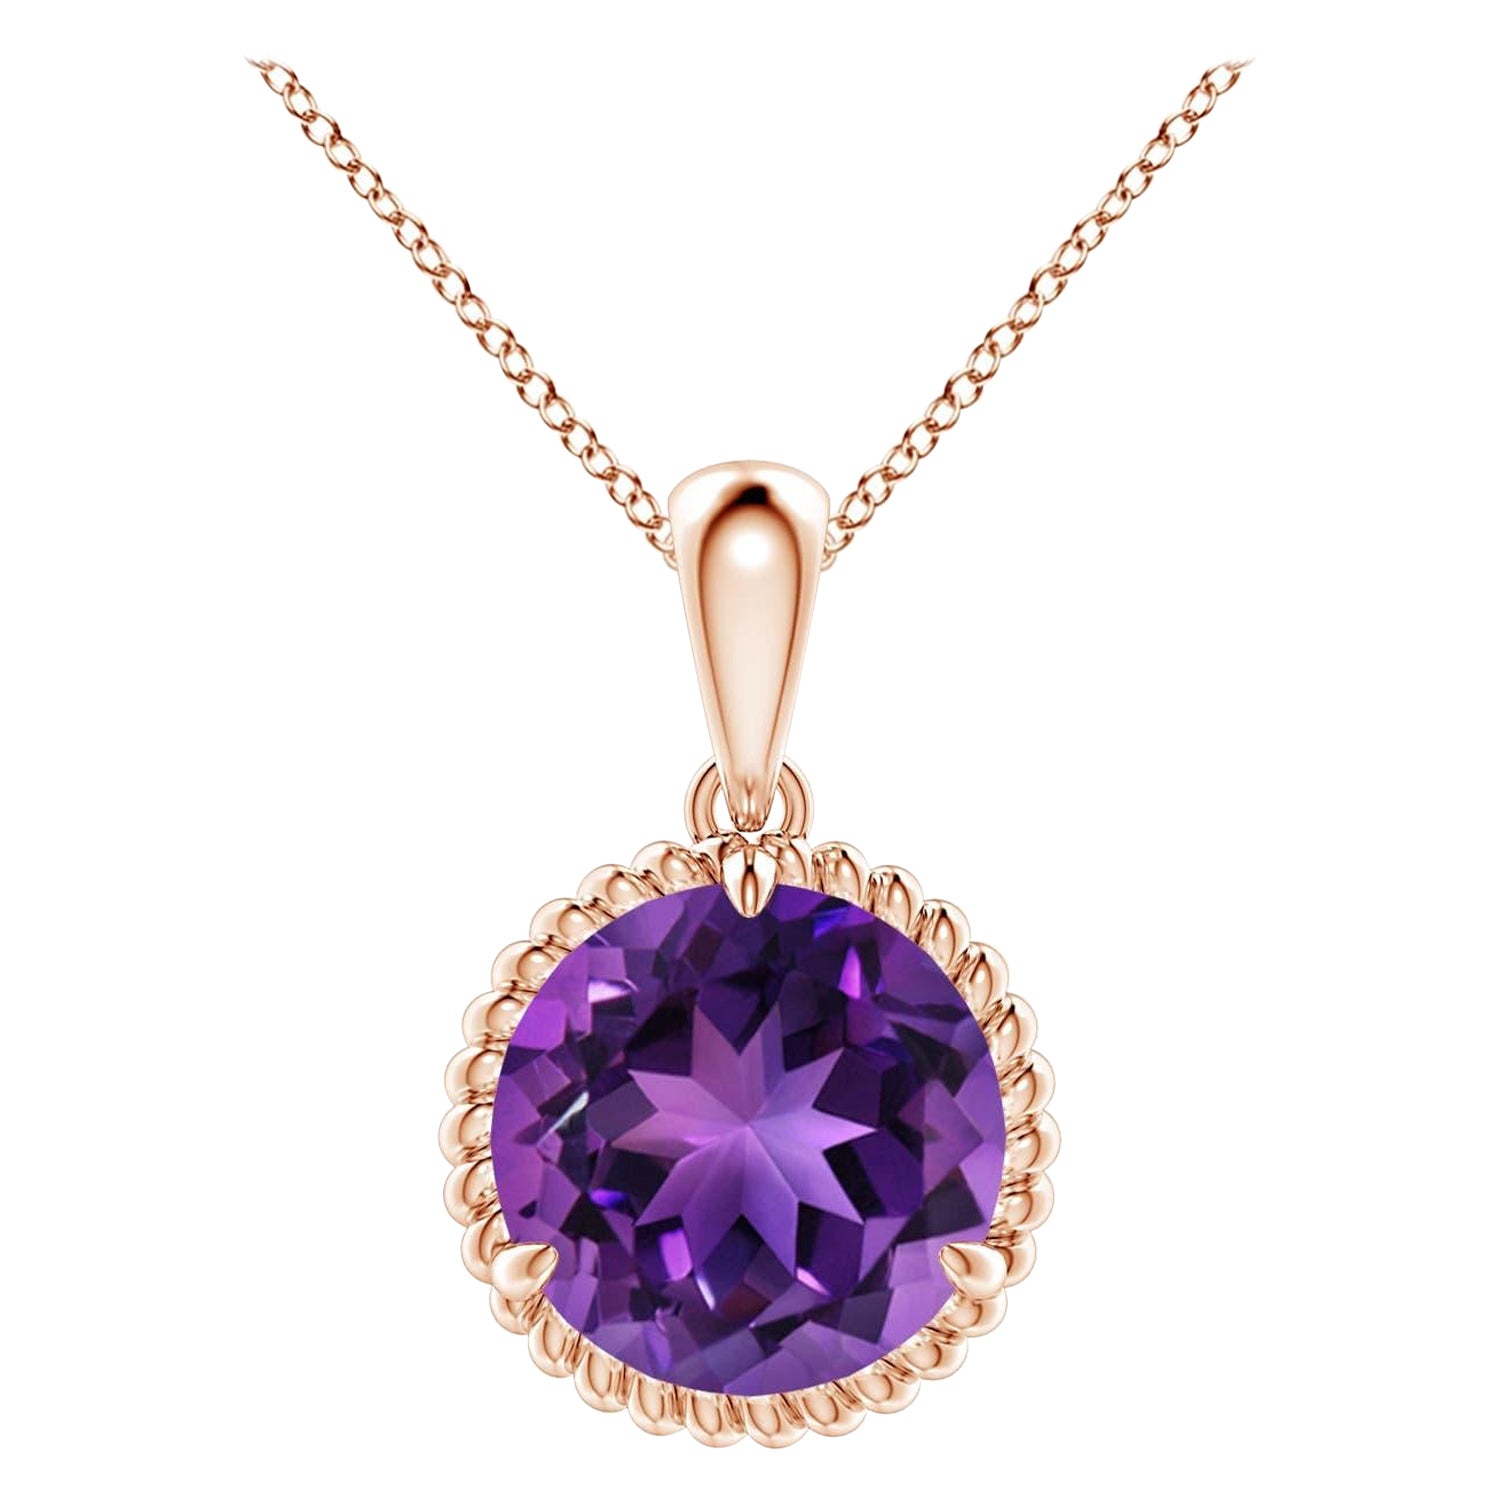 Natural Rope-Framed 2.45ct Amethyst Solitaire Pendant in 14K Rose Gold